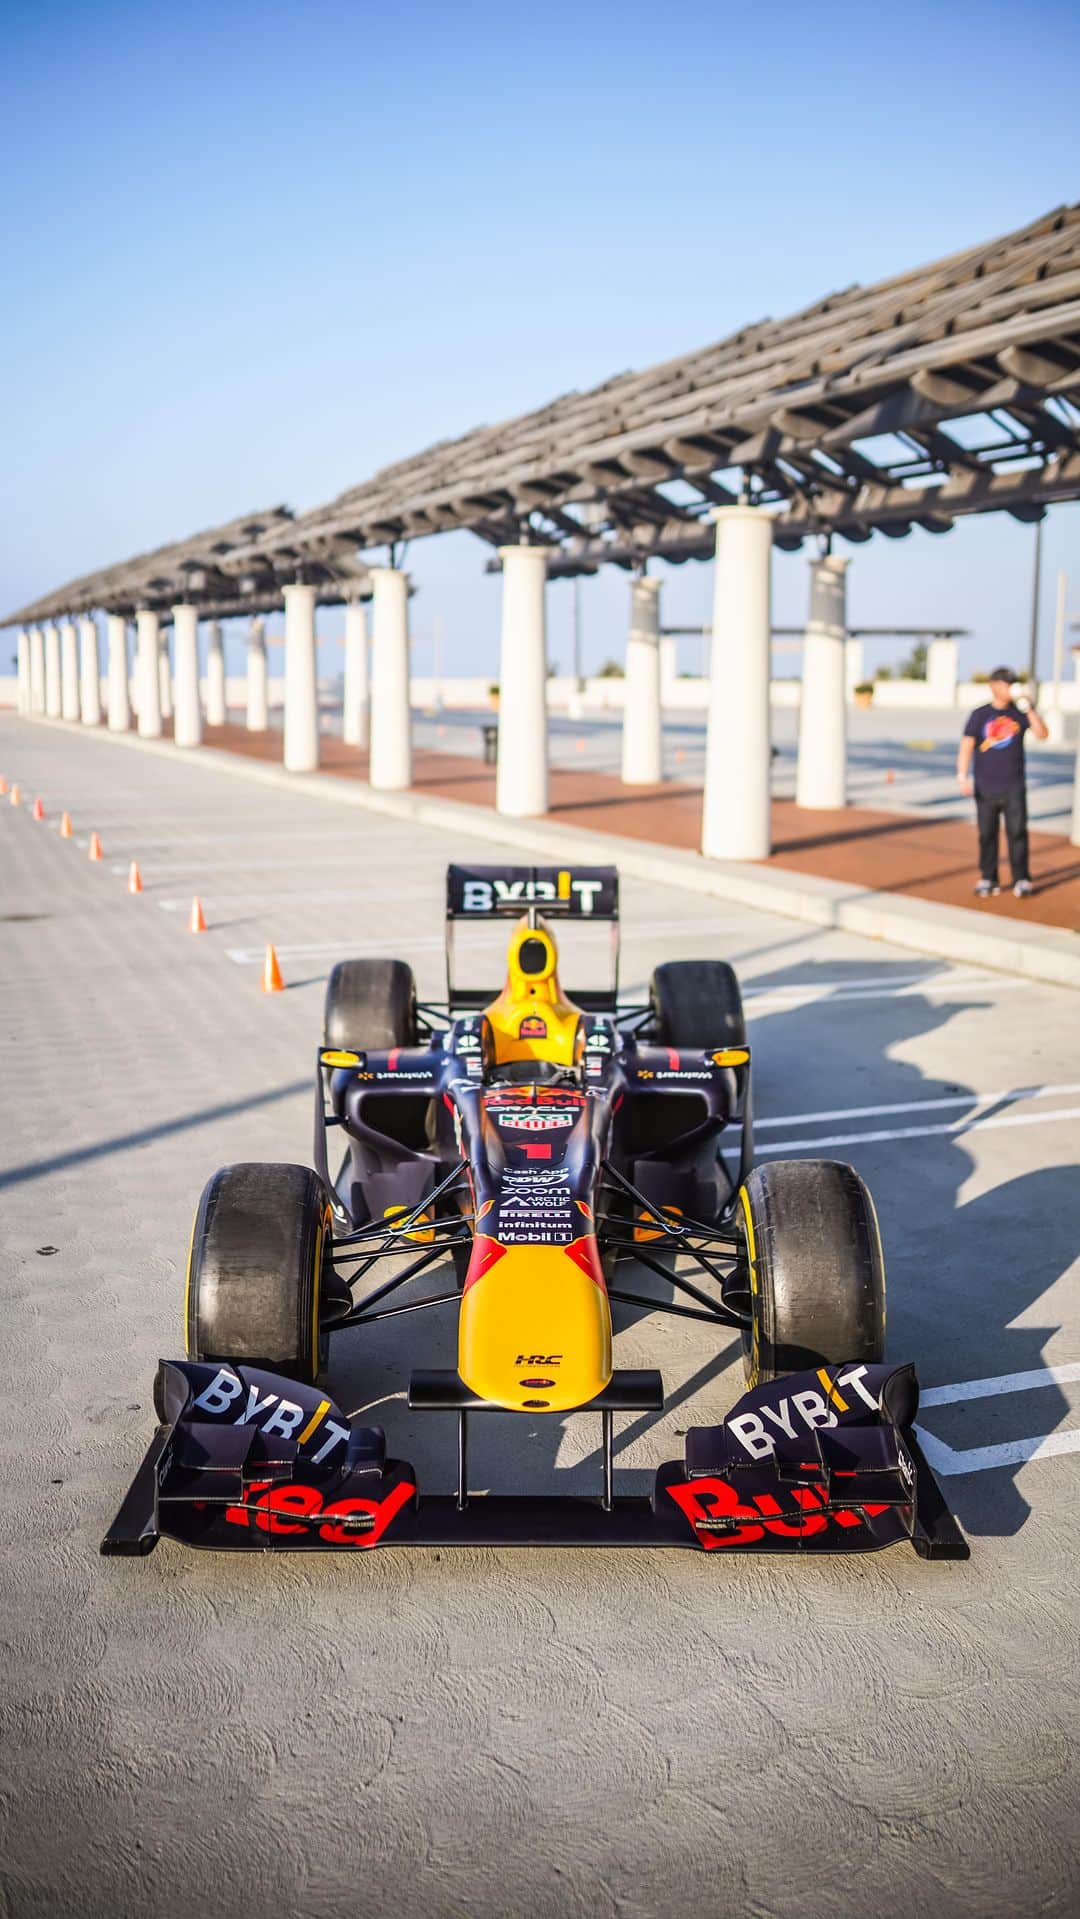 CARLiFESTYLEのインスタグラム：「Flawless from every angle.   Thank you to the amazing team at @redbullracing for bringing out the most insane car we’ve ever had at our event.   What should they bring next?   ———————————————————————— 🔥 ATTENTION 🔥 No Revving, Speeding, or Burnouts. Please drive slowly through San Clemente! Respect the property, and have a great time! • Follow our Sponsors:  @wehrmarketing @thebracketeer @meguiars @polestarsouthcoast @nxtlevelprotection @carbontastic @happyjewelers @thepdmbrands @polarisslingshot @reviverauto @continental_tire @outletssc • • • • _-_-_-_-_-_-_-_-_-_-_-_-_-_-_-_-_-_-_- #supercarlifestyle #supercarsdaily #supercarsofinstagram #supercars247  #supercarclub #supercarlife #supercardaily #supercarspotter #carsandcoffee #dde #dailydrivenexotics #koenigsegg #lamborghini #pagani #modernrides #southoccarsandcoffee _-_-_-_-_-_-_-_-_-_-_-_-_-_-_-_-_-_-_-」